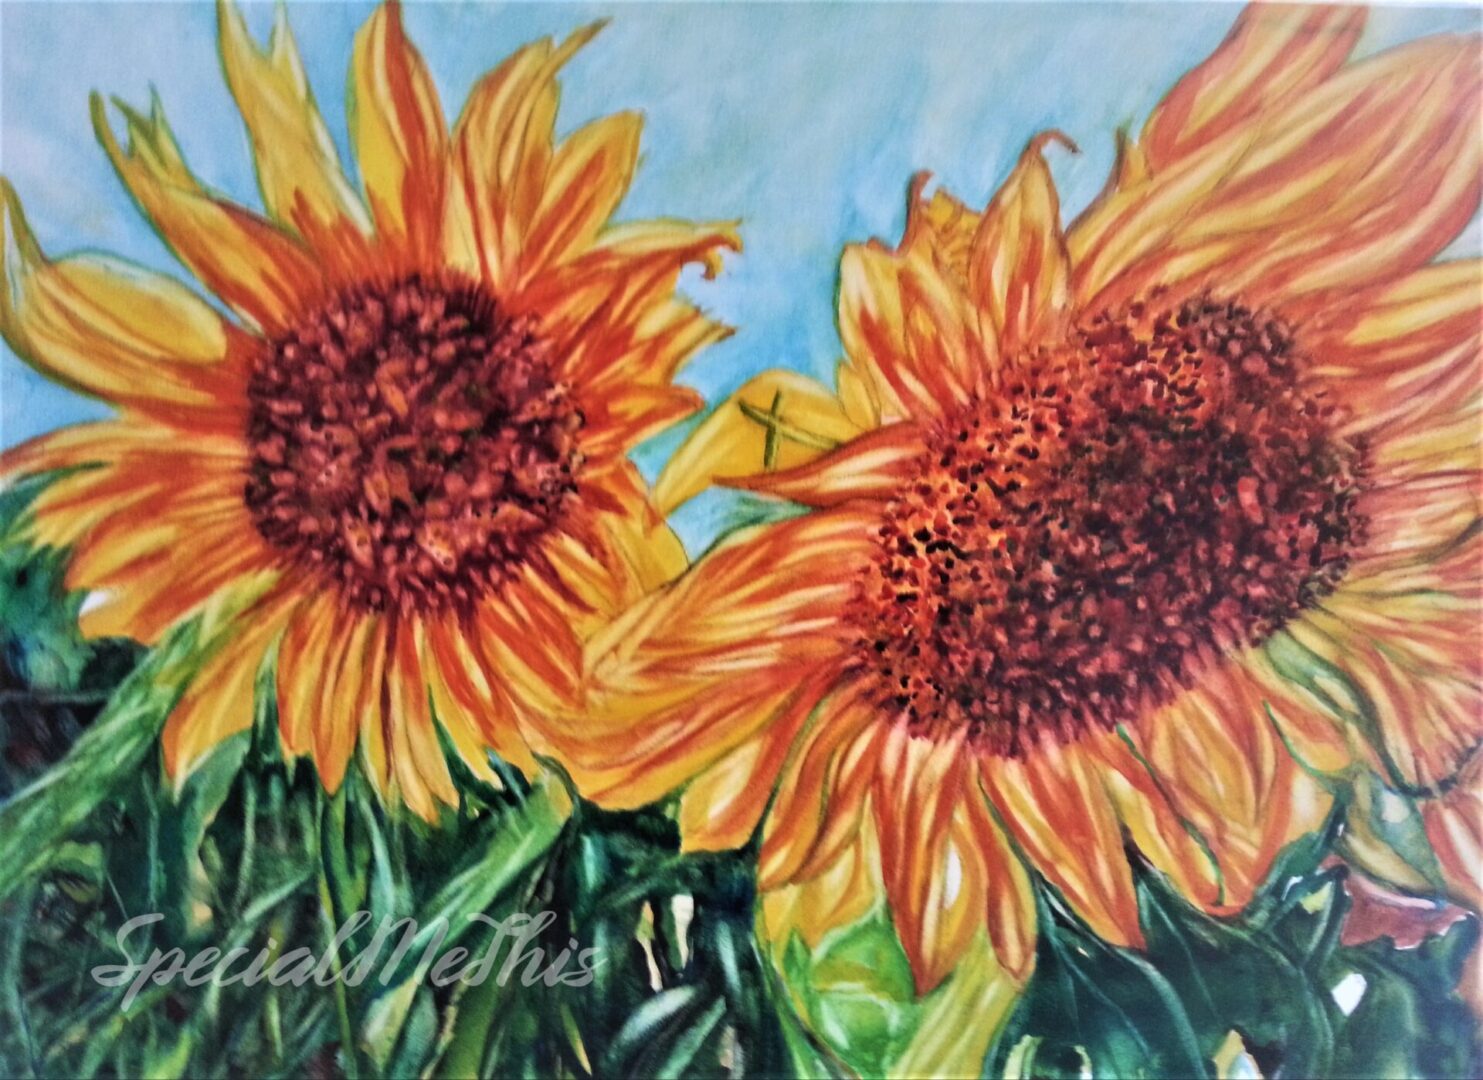 A painting of Katharine's Sunflowers on a blue background.